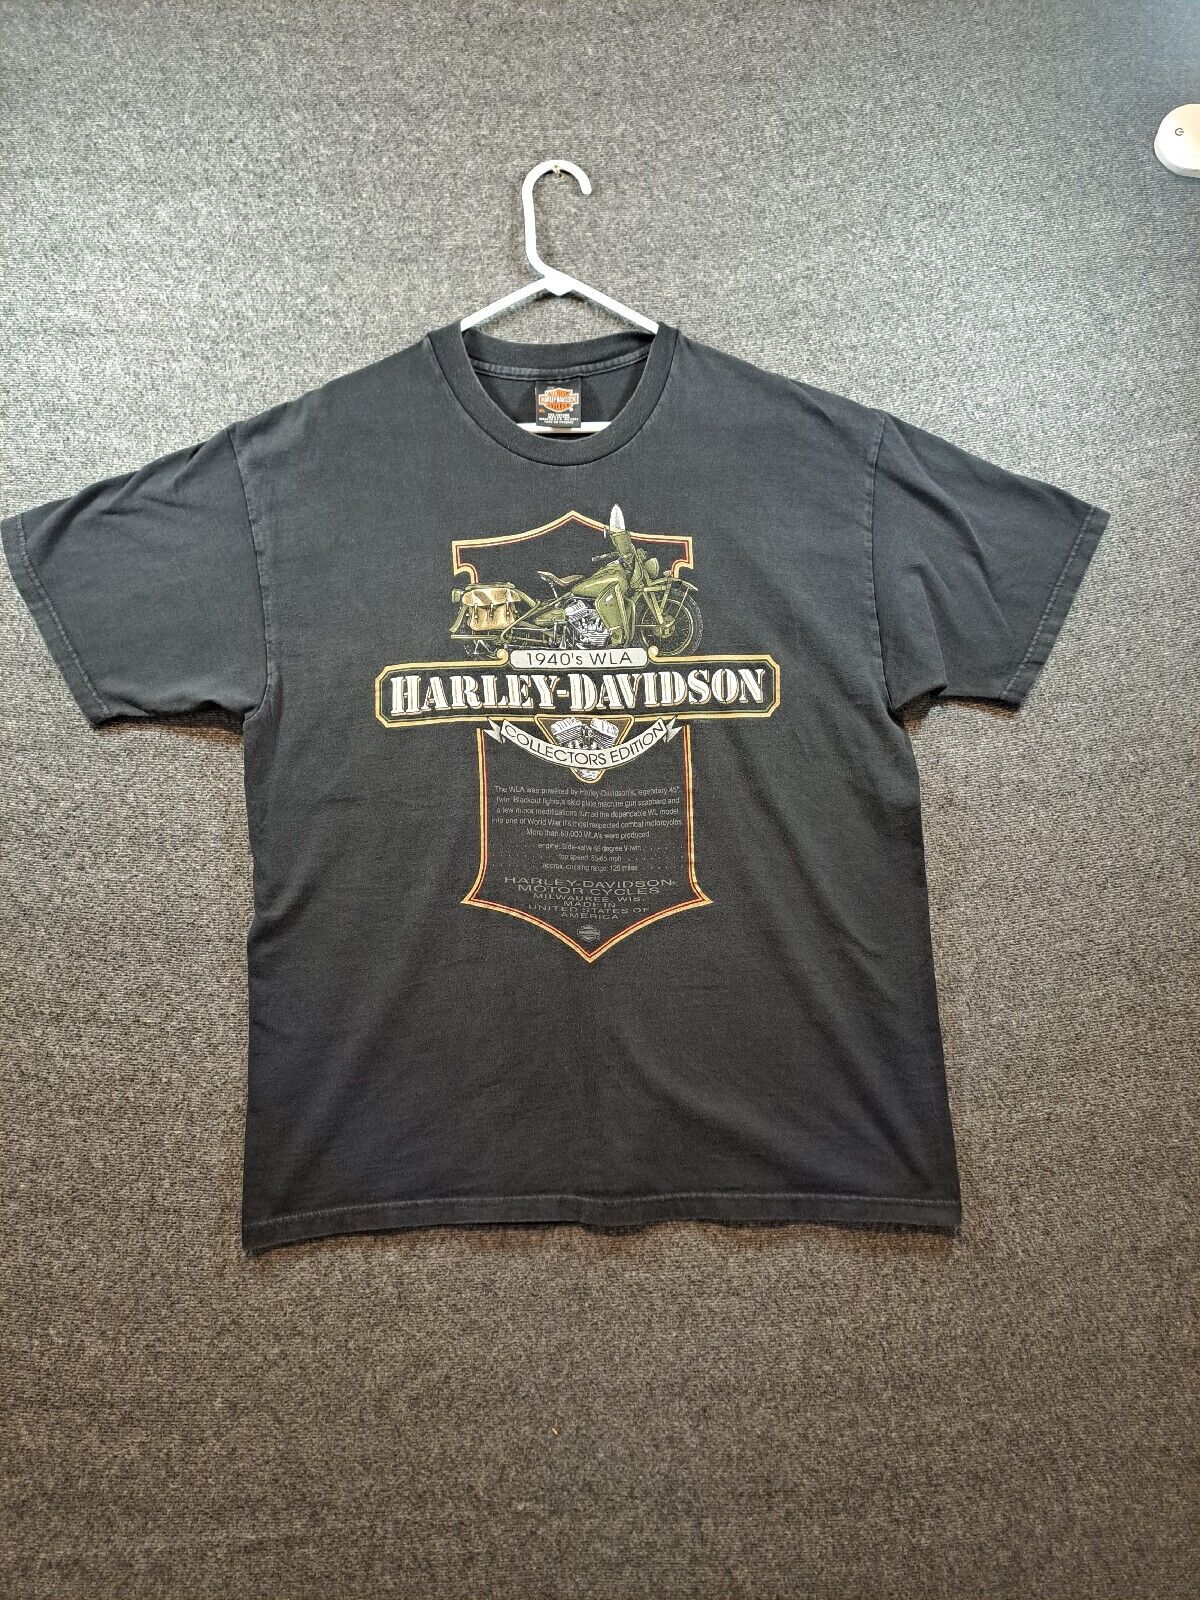 Vintage Men's Harley-Davidson Graphic T-Shirt 1940s WLA Collector's Edition 90s 